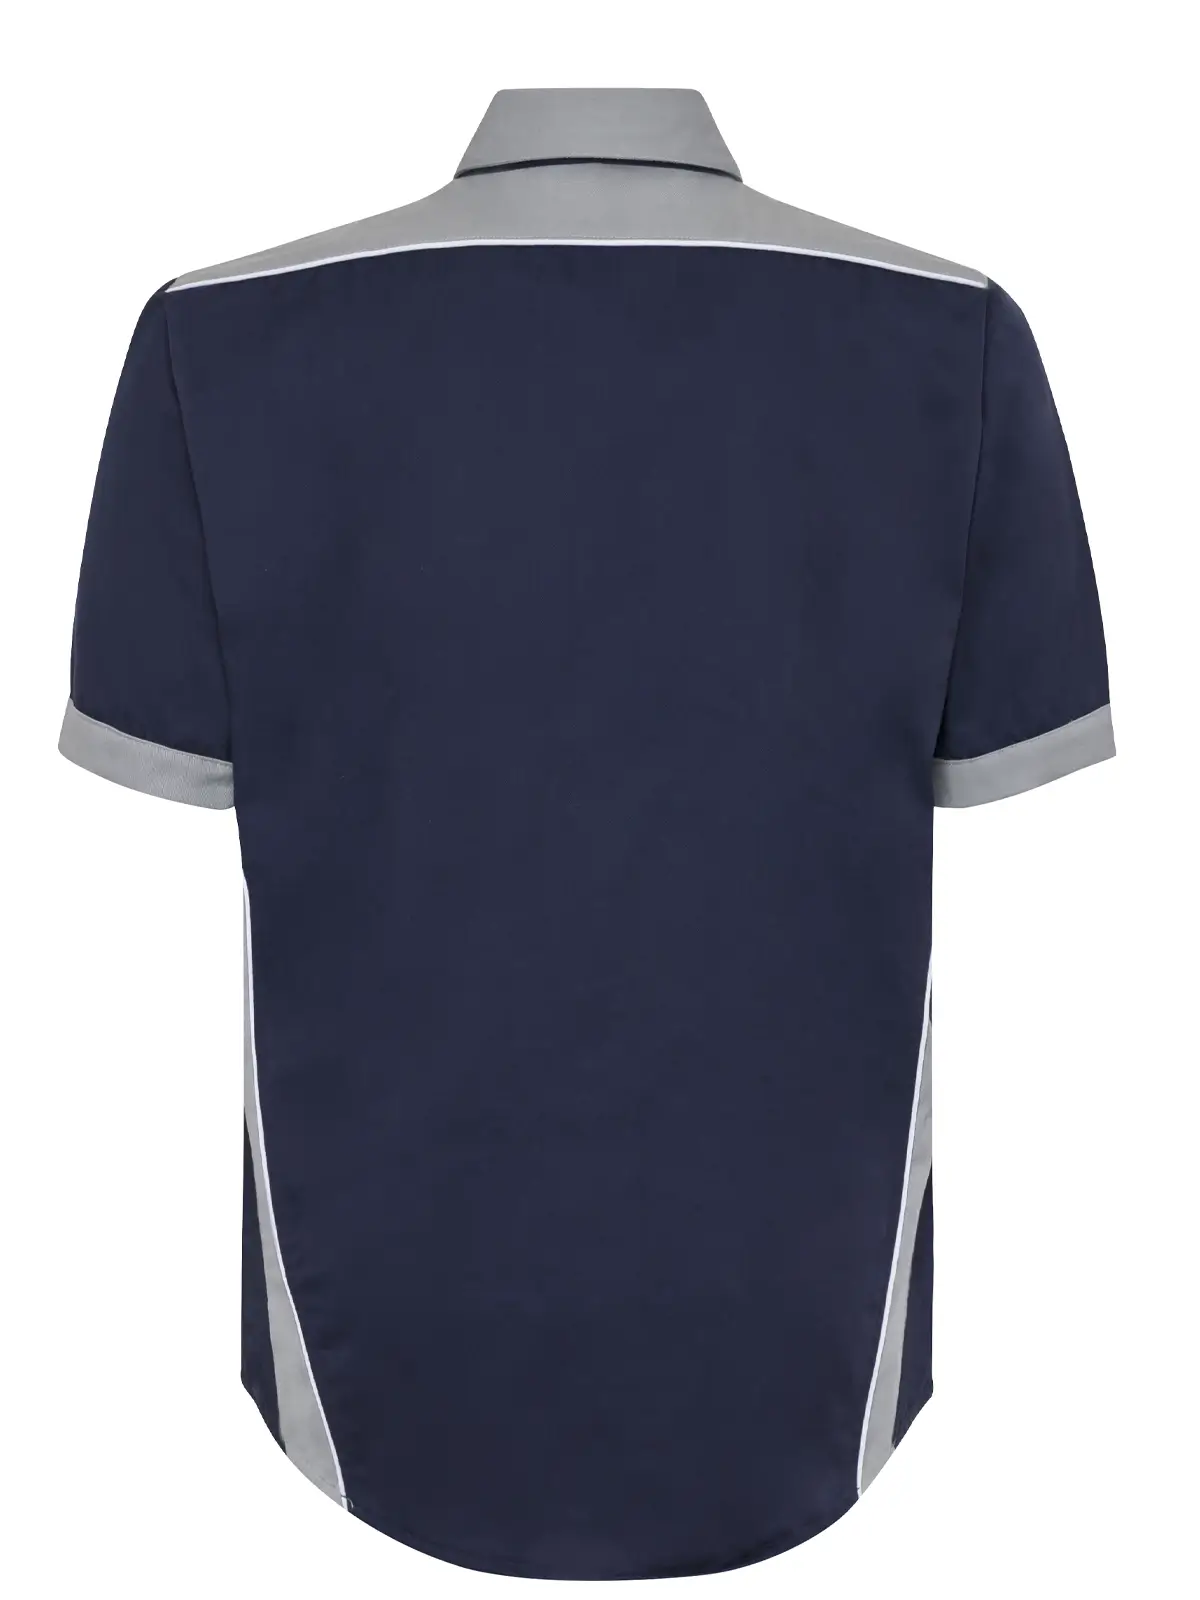 Navy blue industrial shirts